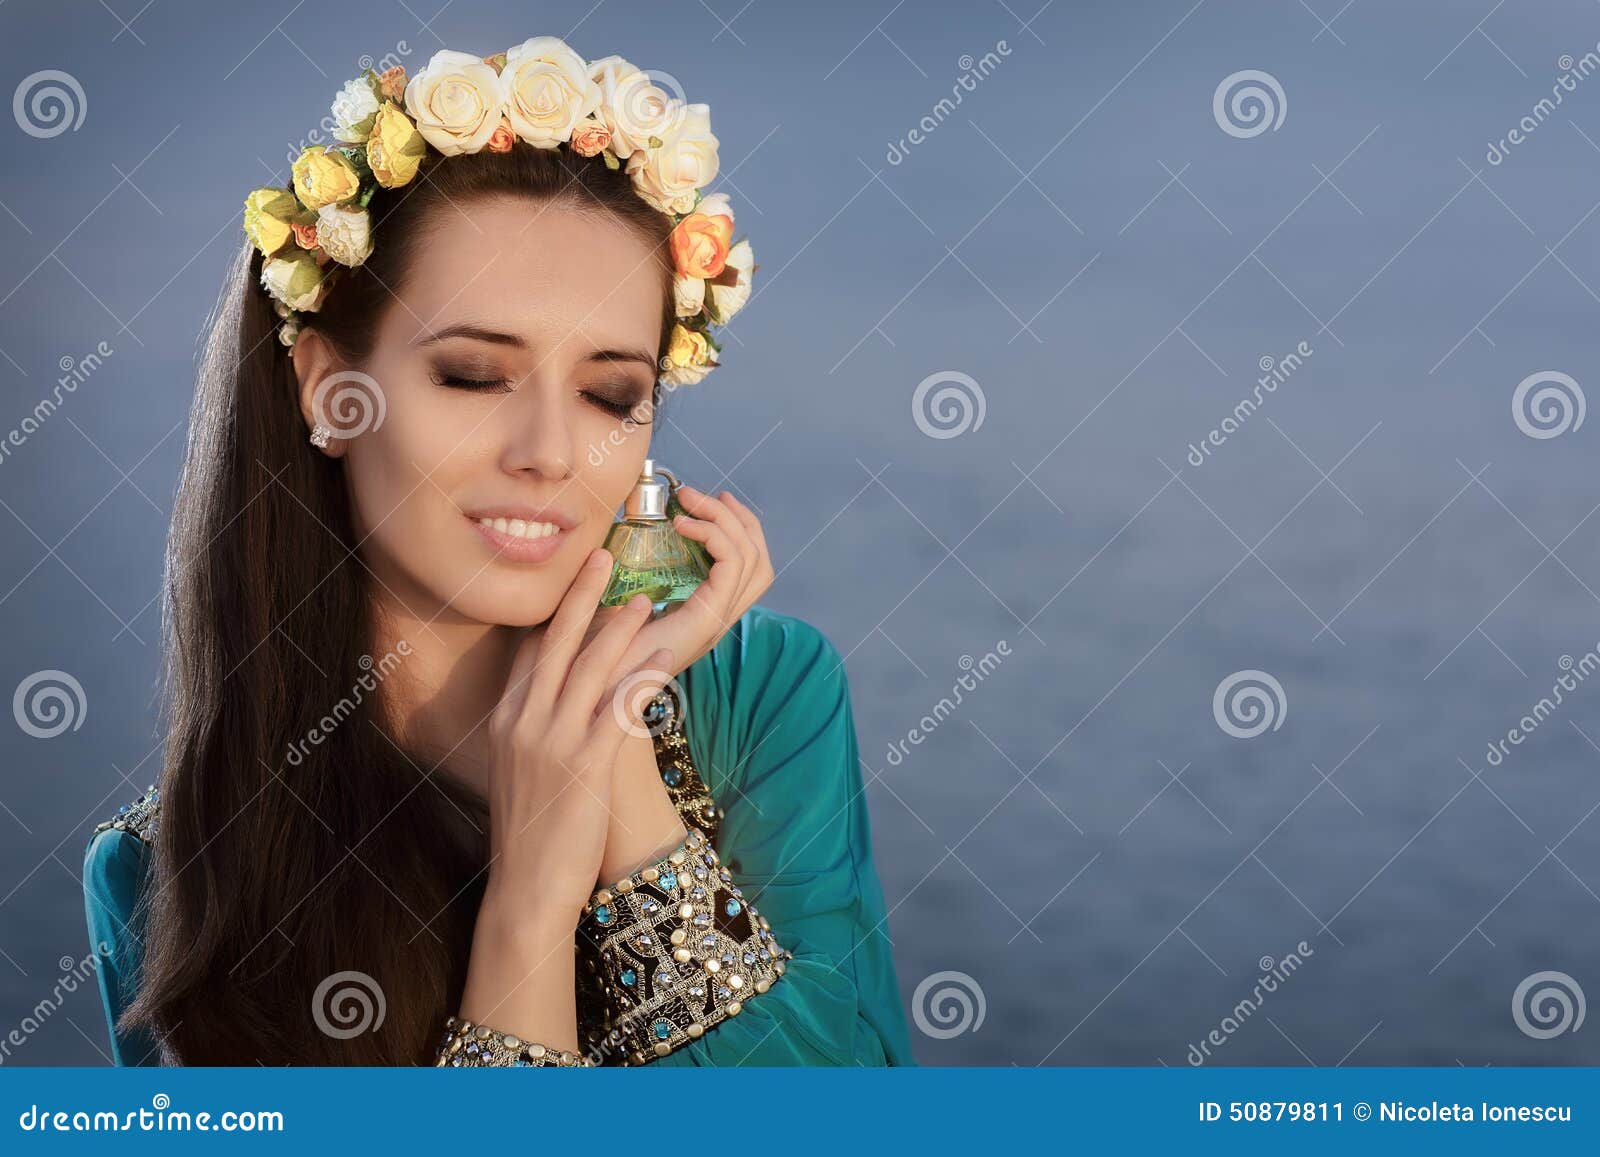 Young Woman Holding Perfume Bottle in Seaside Landscape Stock Image ...